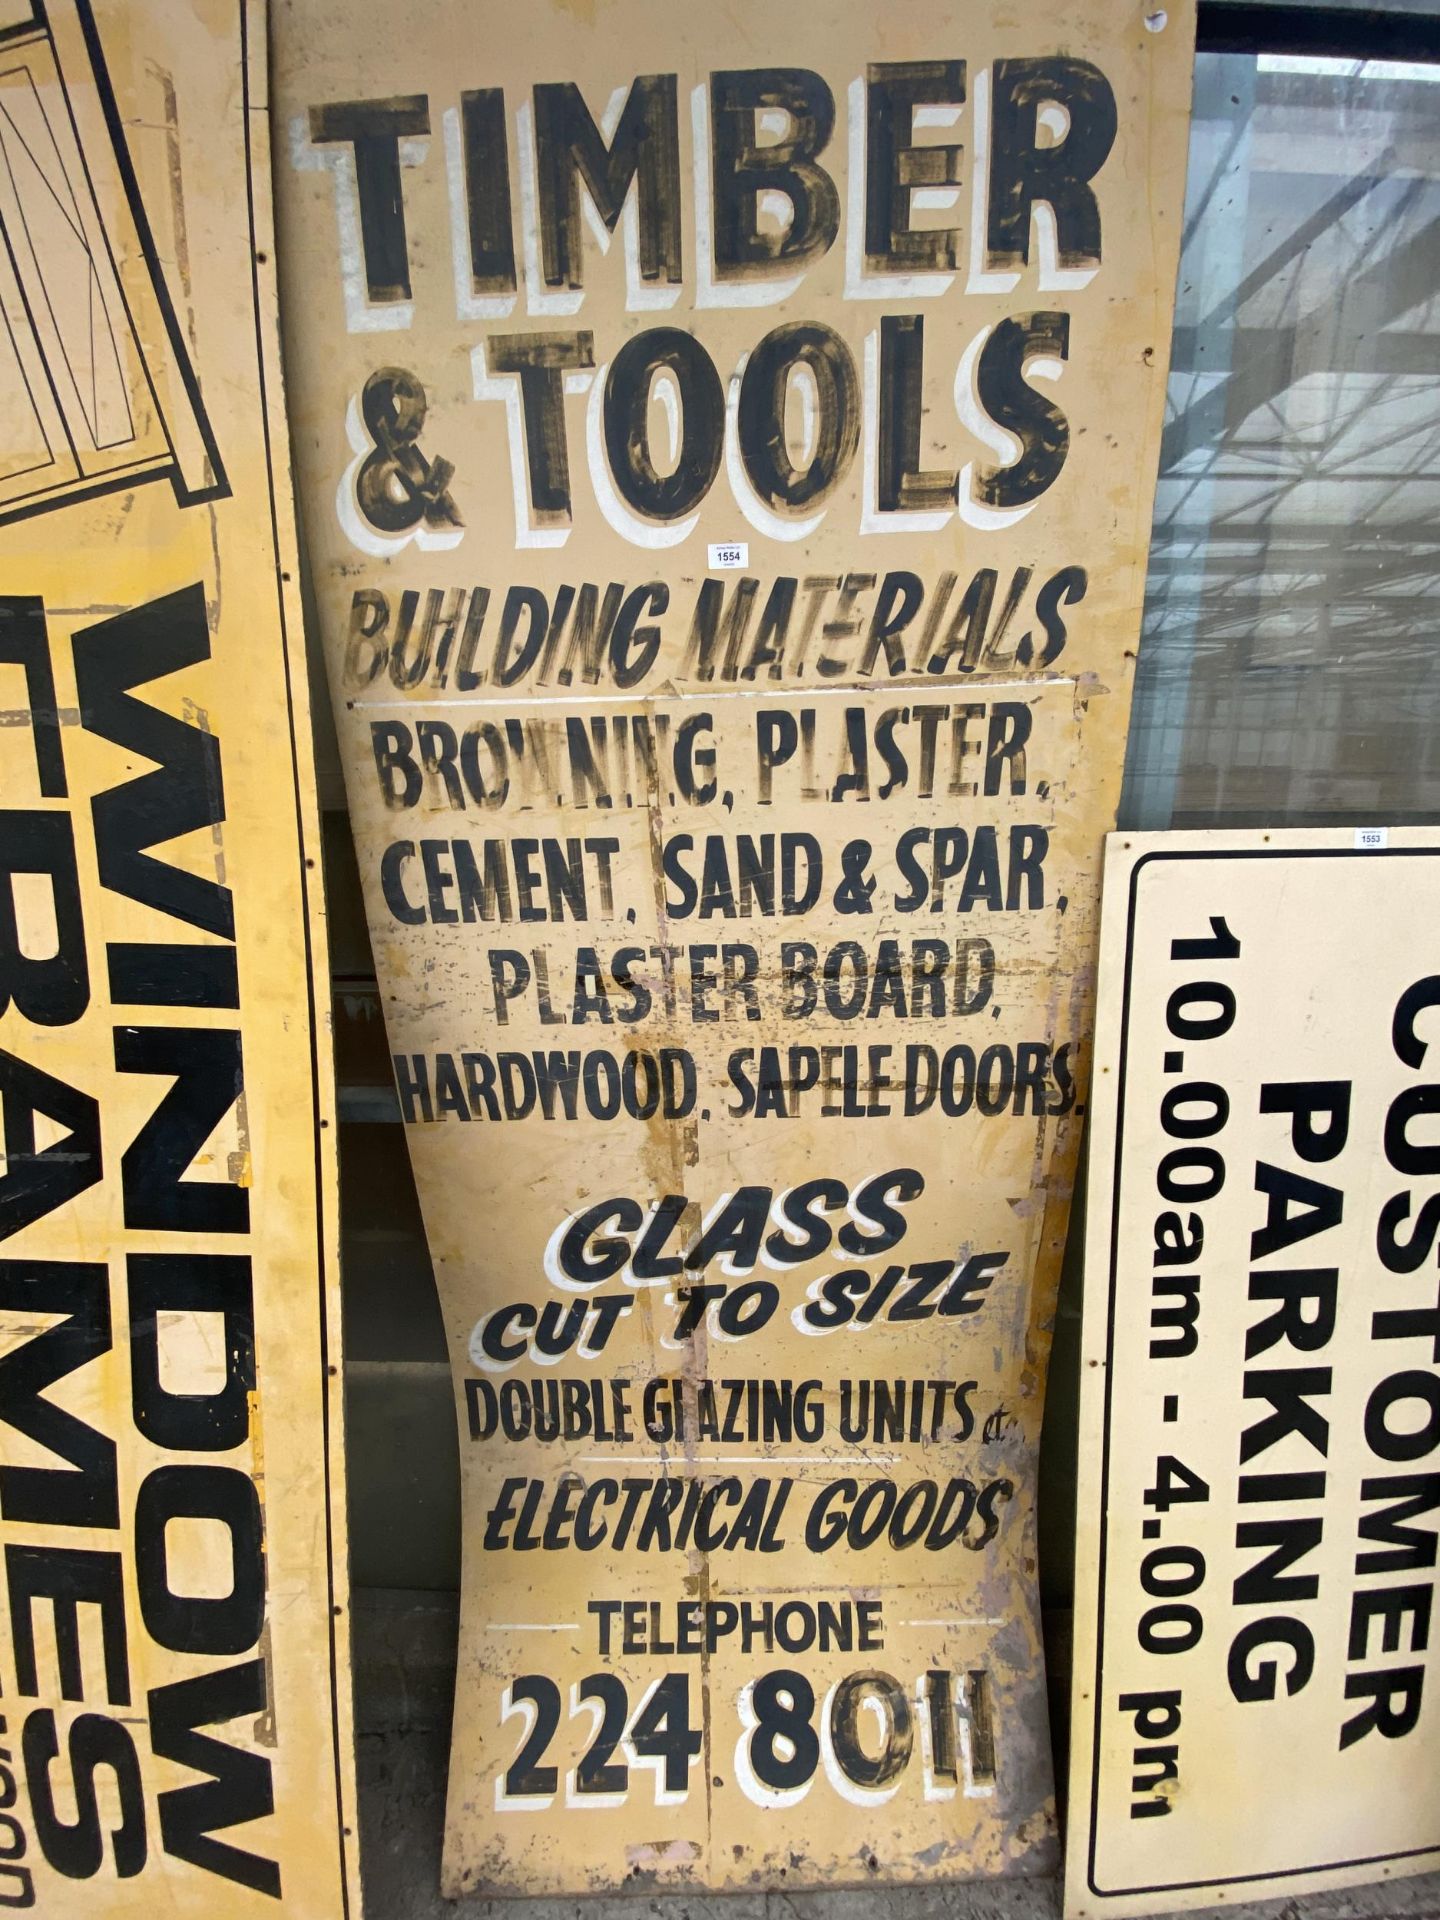 A WOODEN 'TIMBER & TOOLS' SIGN